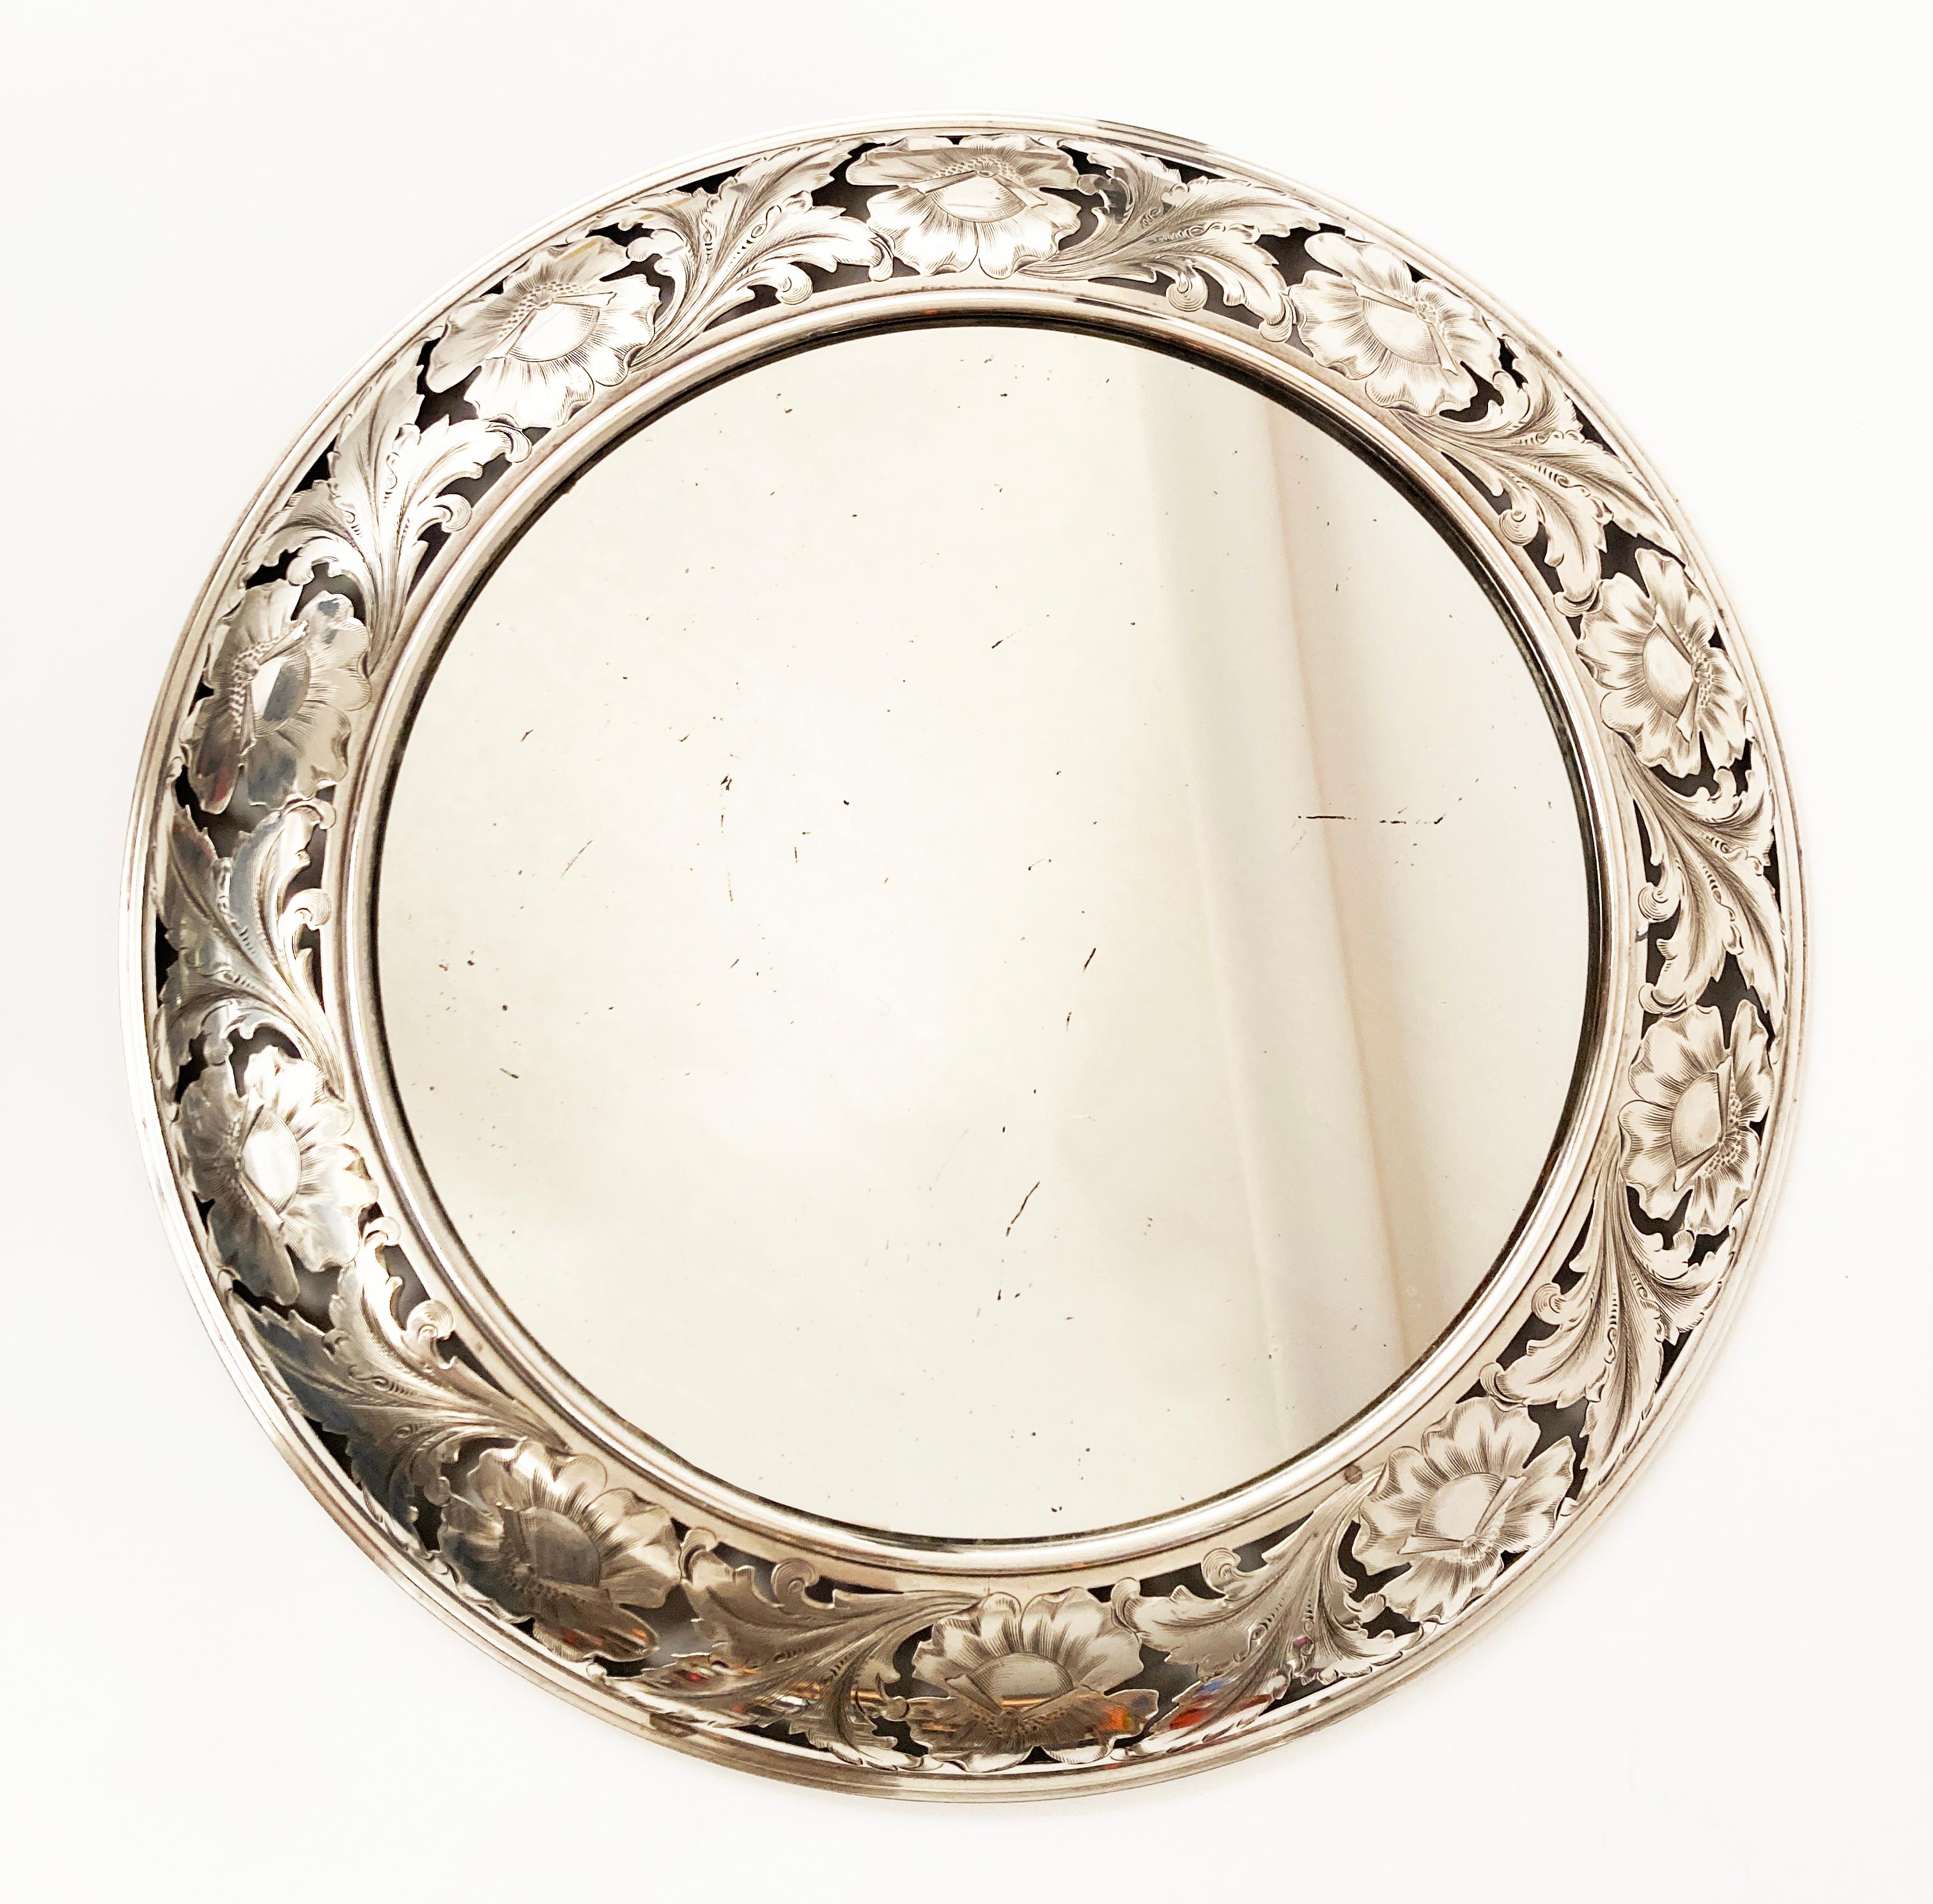 Early 20th Century Sterling Silver Circular Reticulated Mirror with Etched Folia In Good Condition For Sale In Louisville, KY